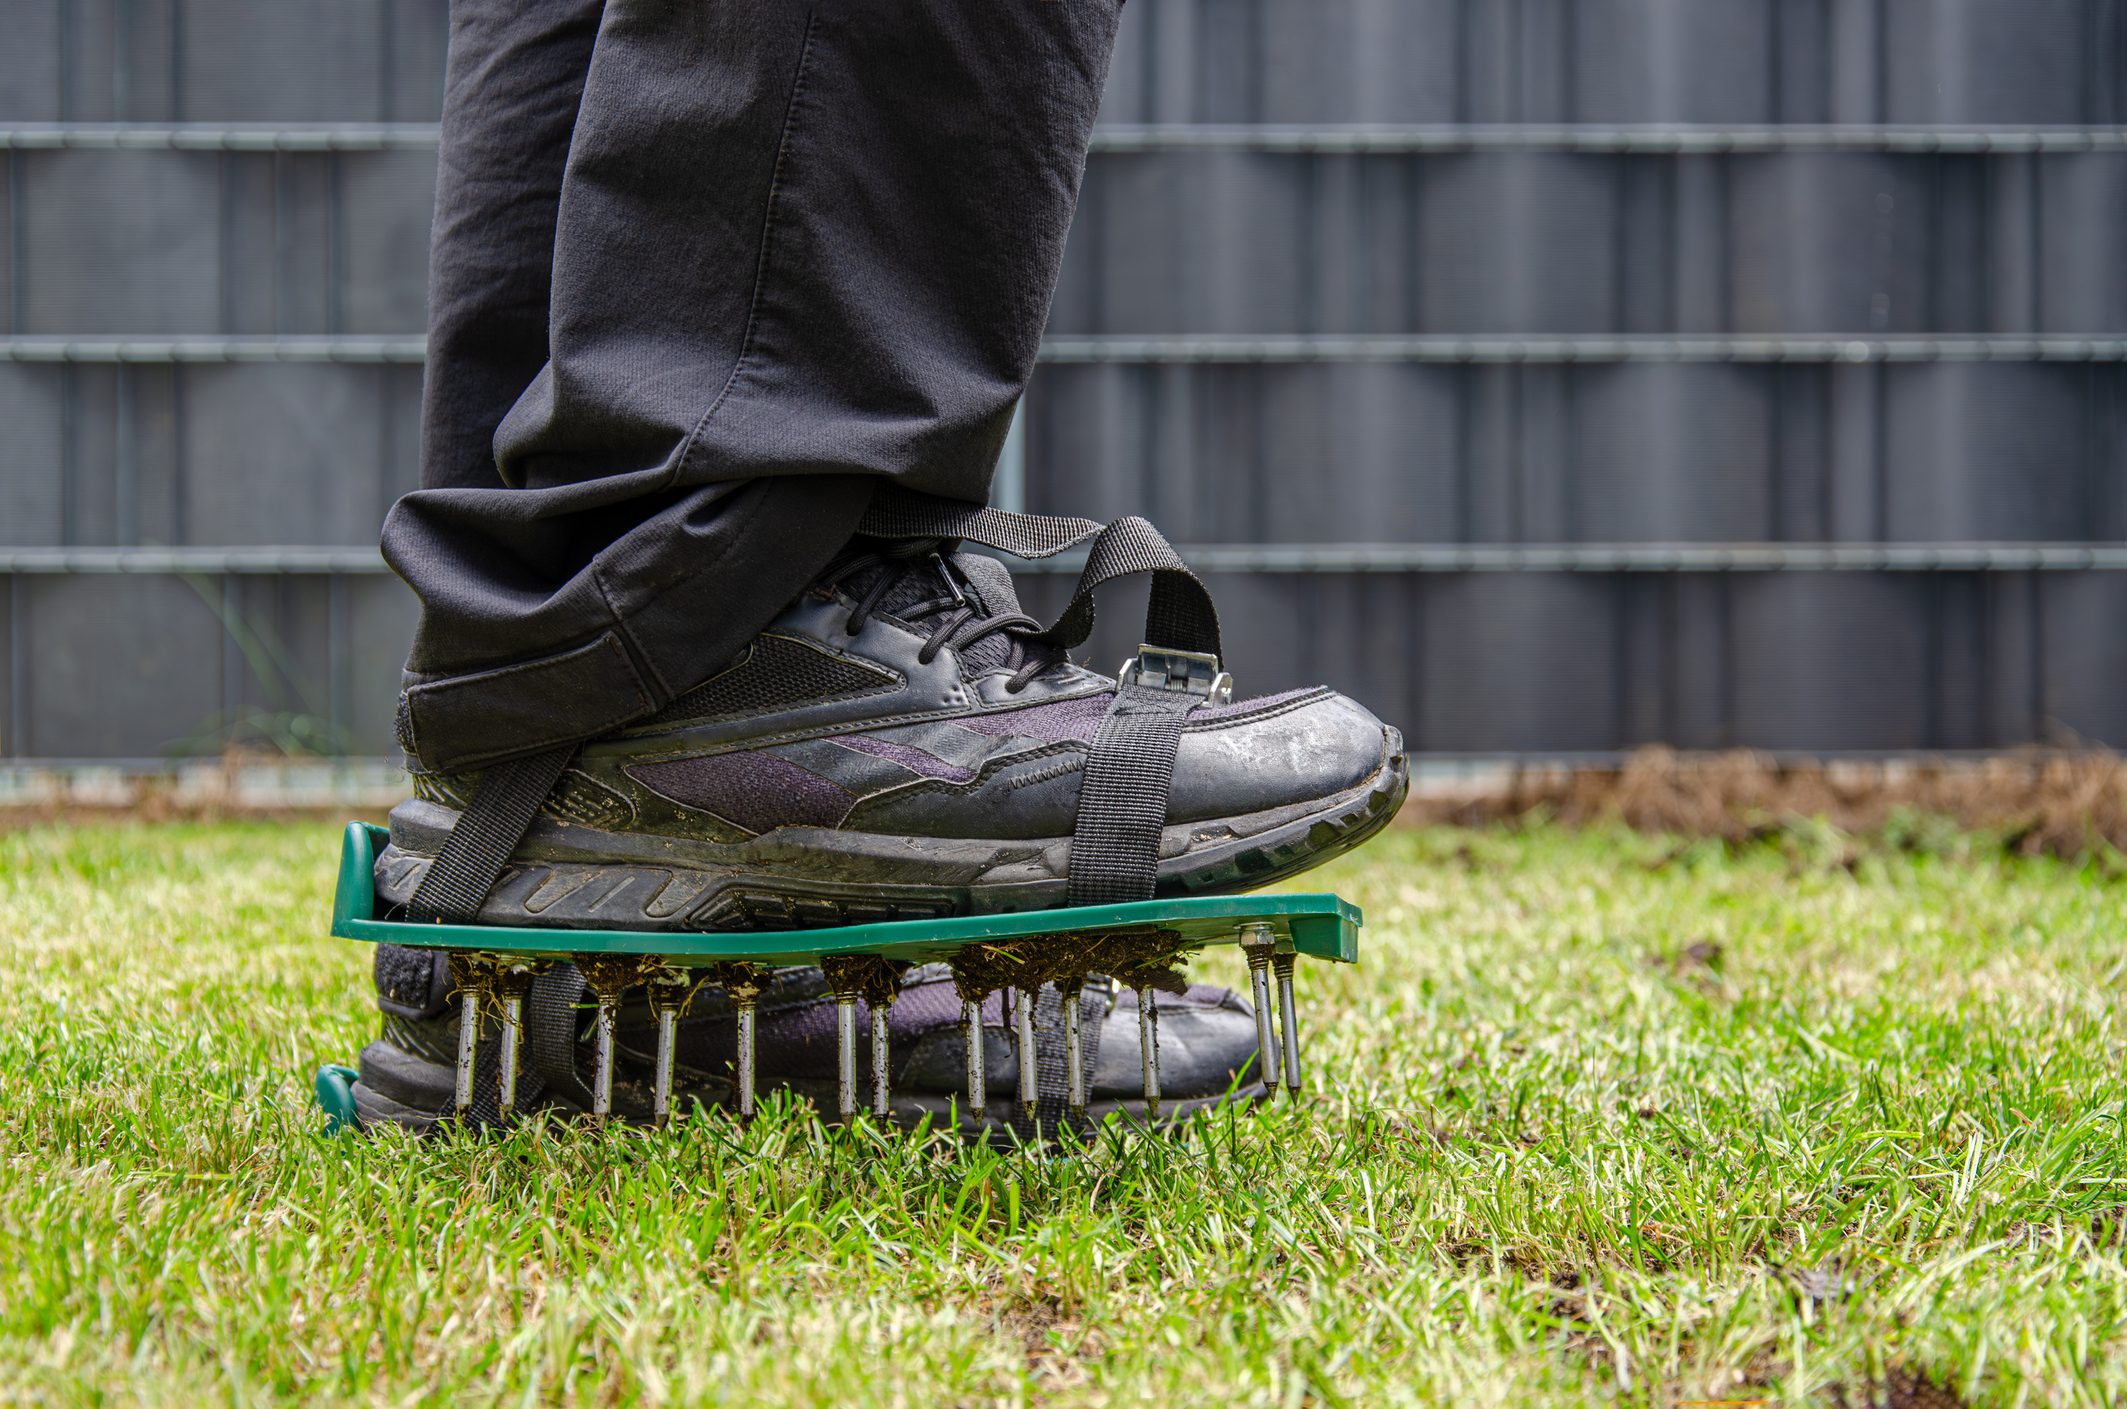 Close-up of lawn aerating shoes with metal spikes